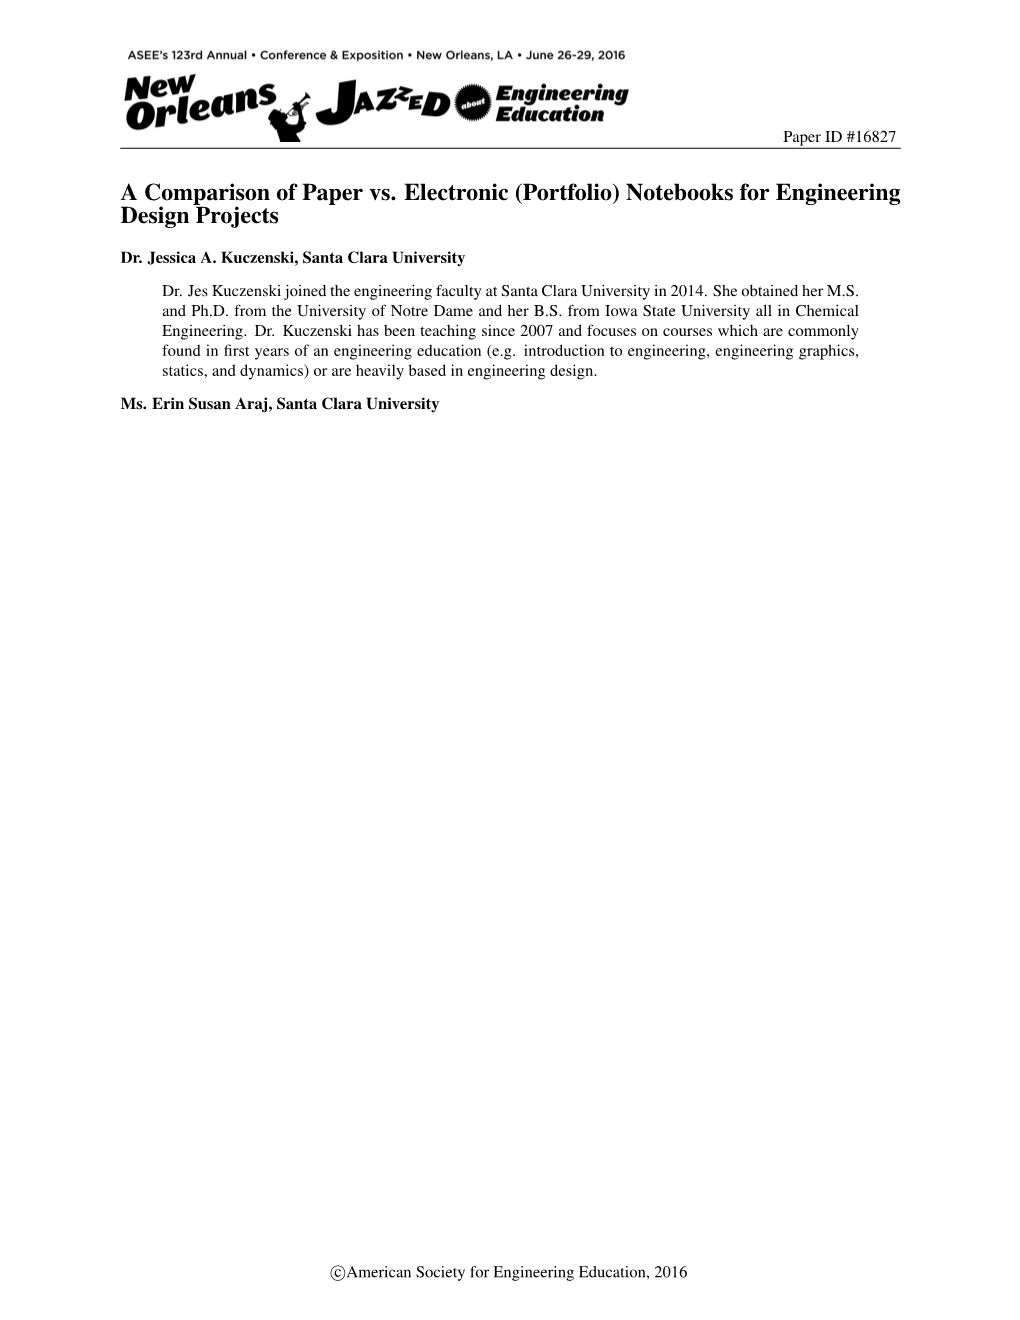 A Comparison of Paper Vs. Electronic (Portfolio) Notebooks for Engineering Design Projects